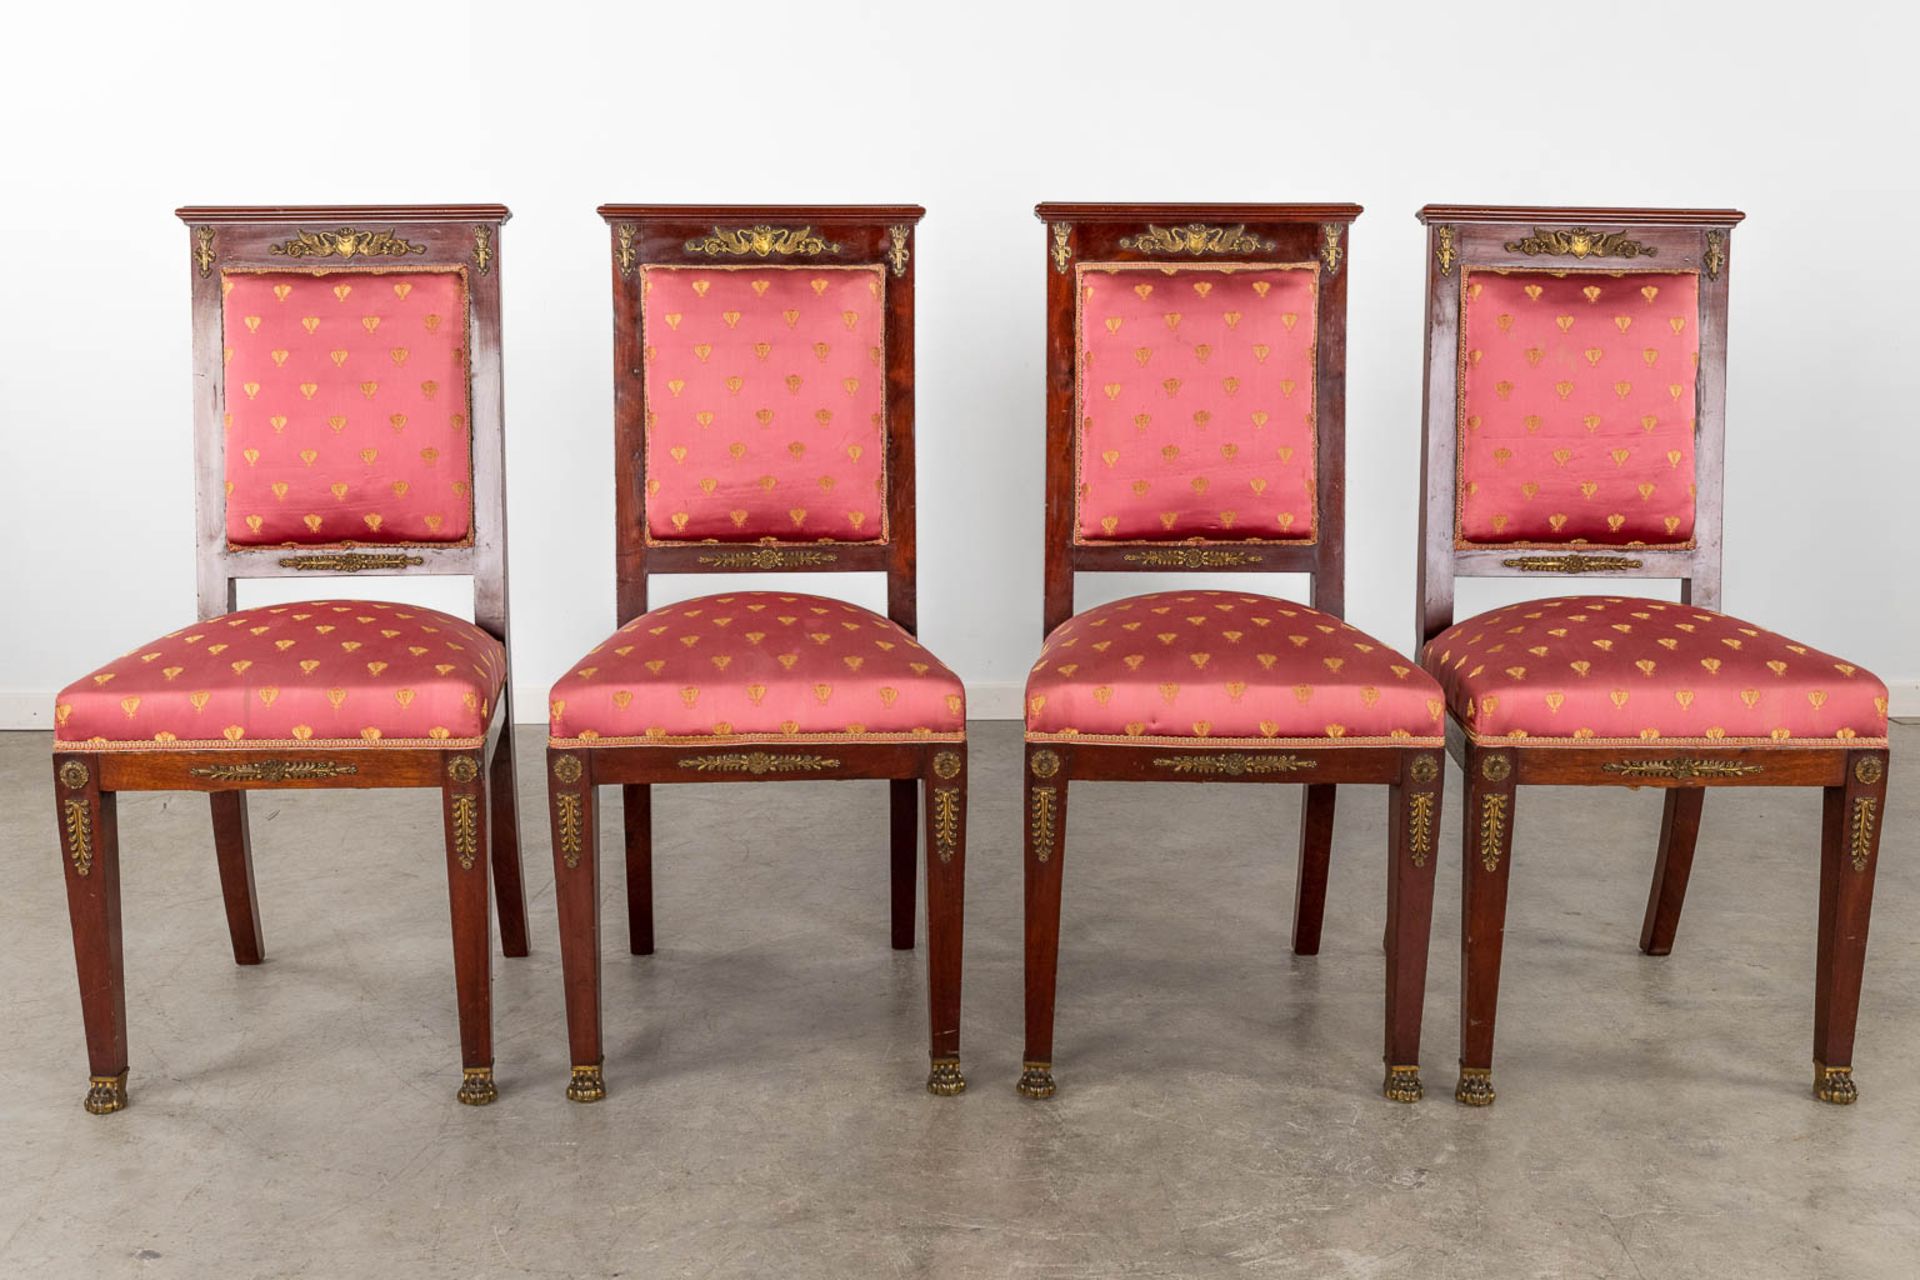 A fine 7-piece salon suite, Empire style, mahogany mounted with bronze. (D:60 x W:130 x H:100 cm) - Image 20 of 25